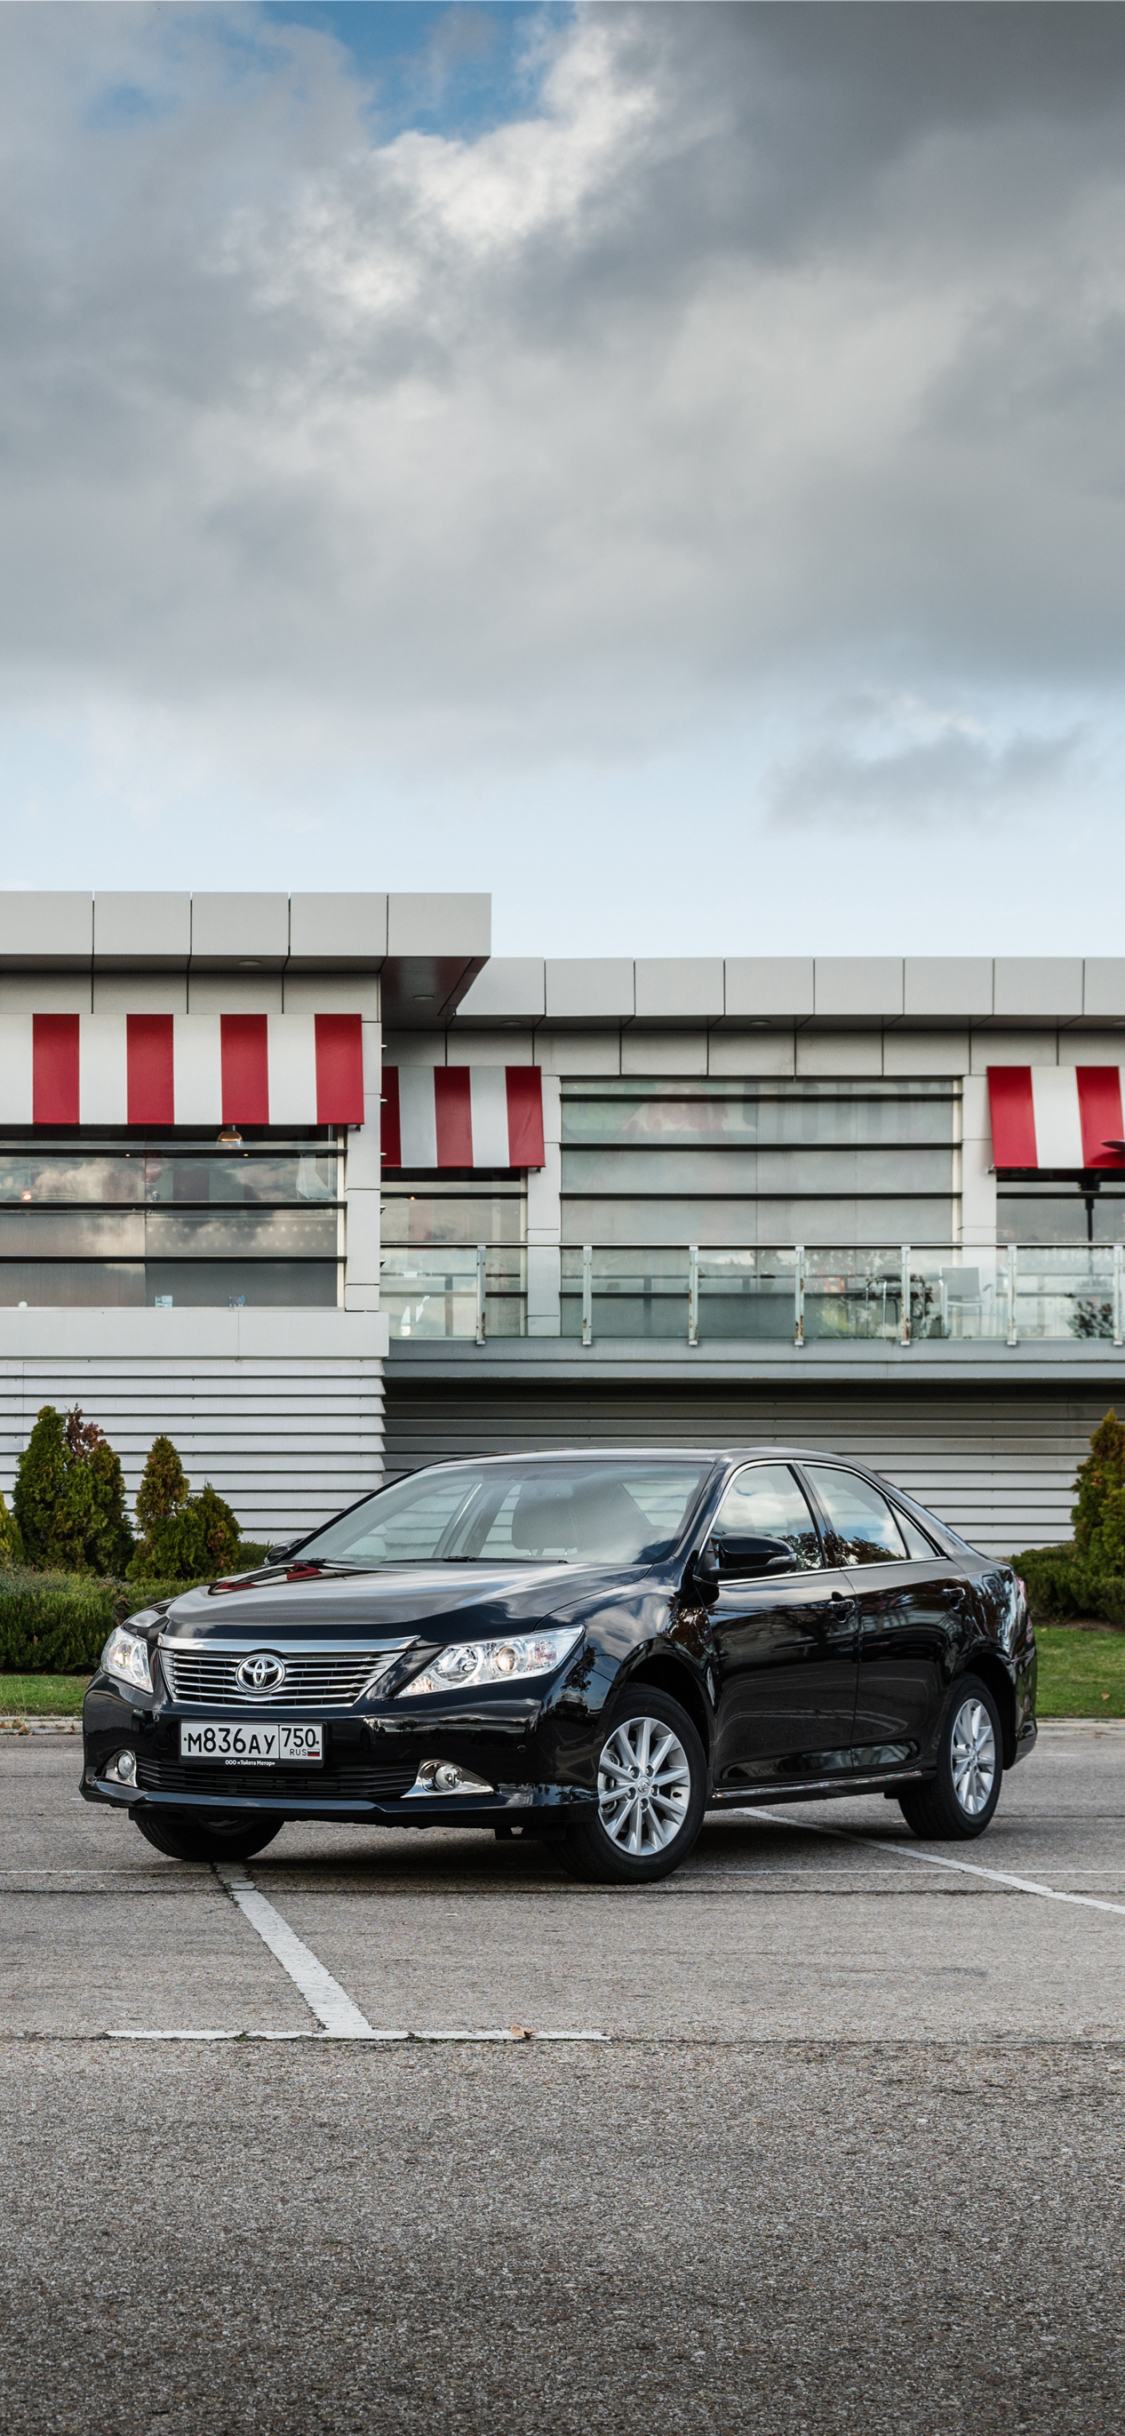 Black car, front, Toyota Camry, 1080x2160 wallpaper | Toyota camry, Camry,  Black car